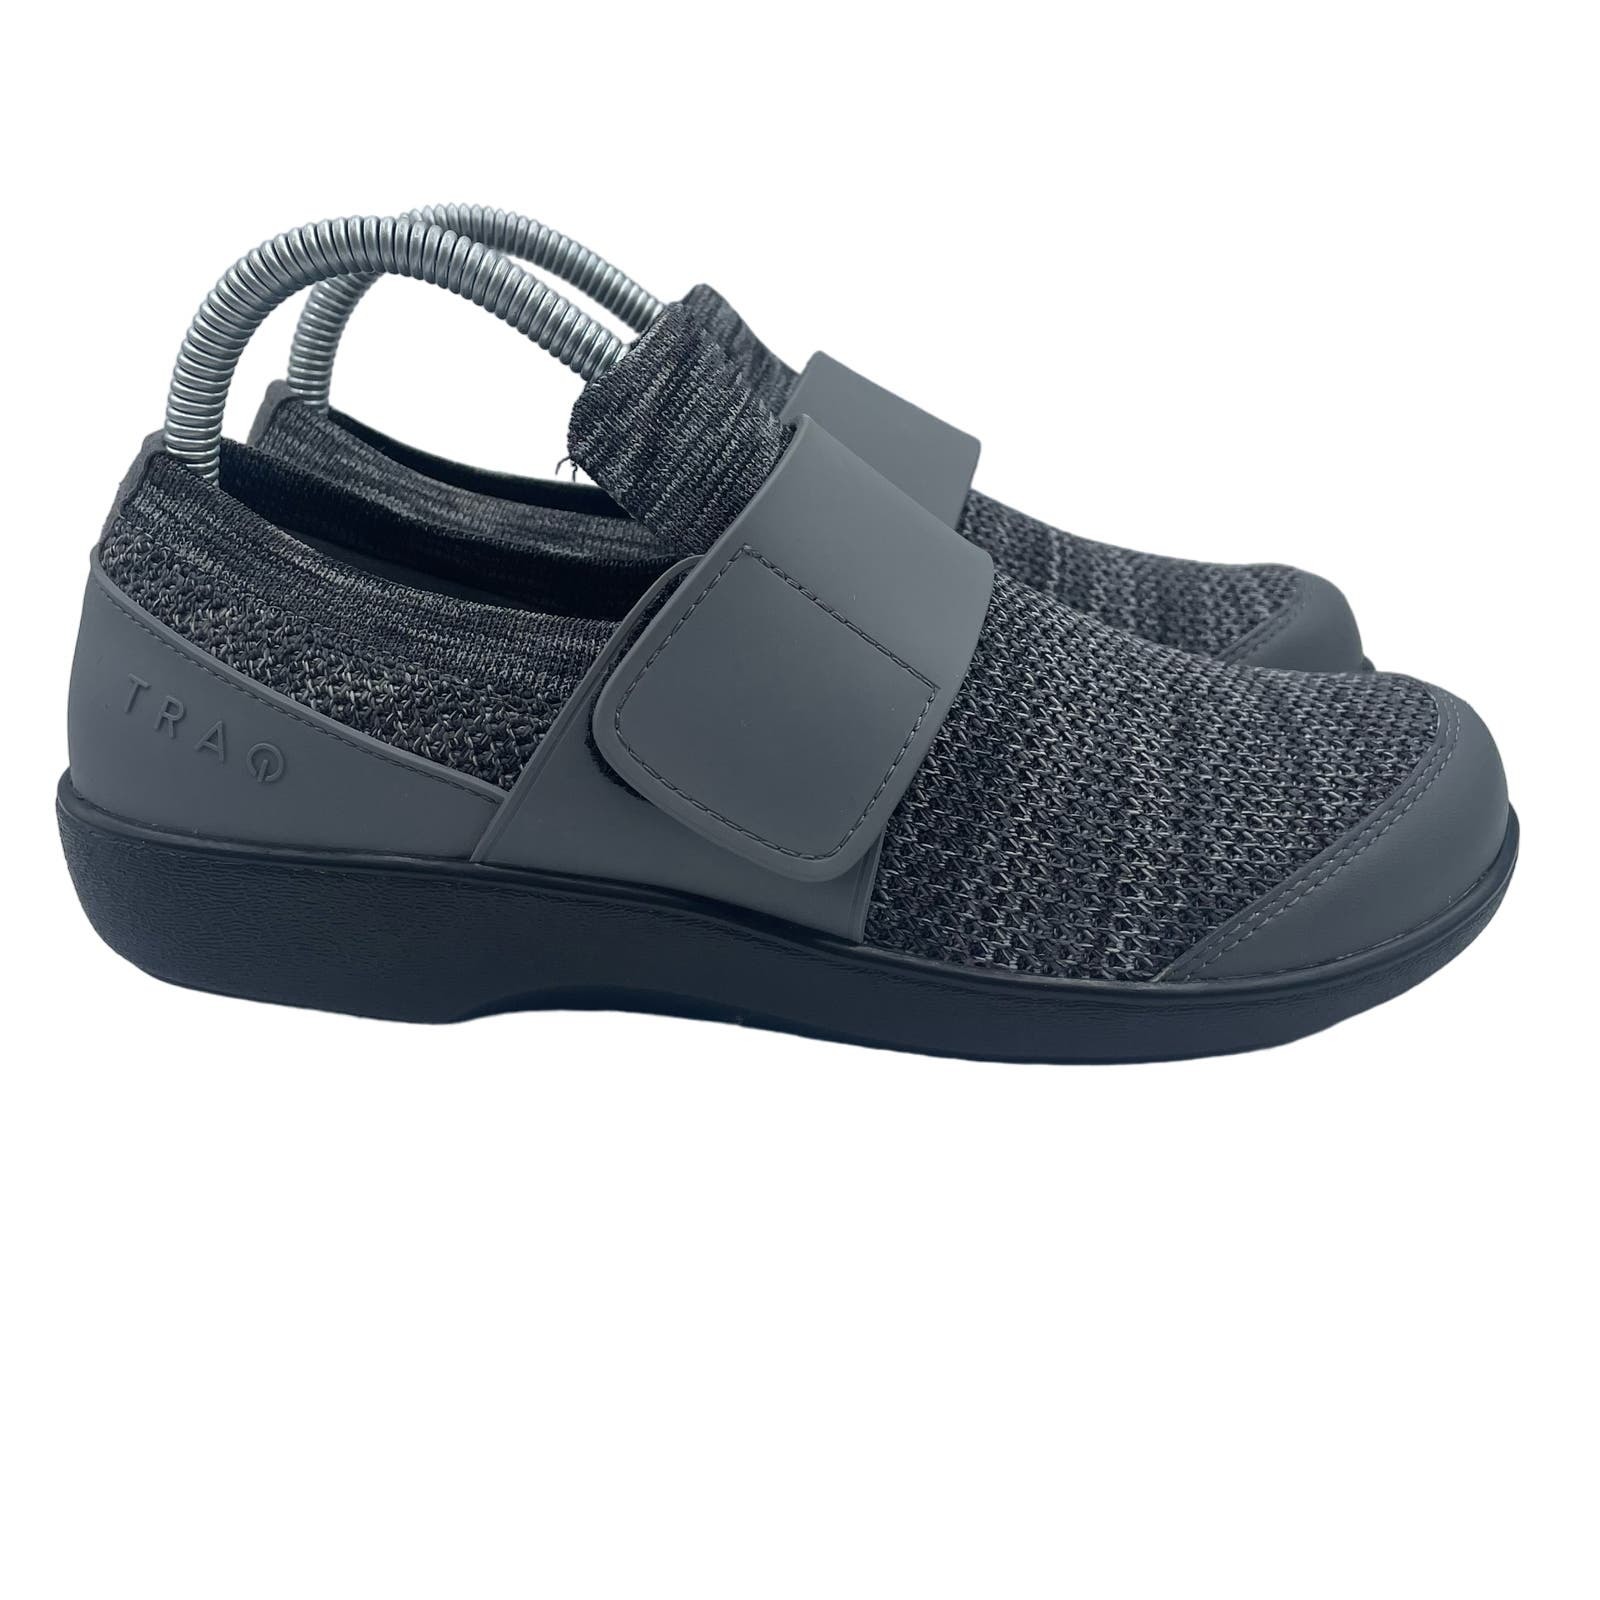 Primary image for Traq Alegria Qwik Shoes Charcoal Gray Comfort Womens 38 8 8.5